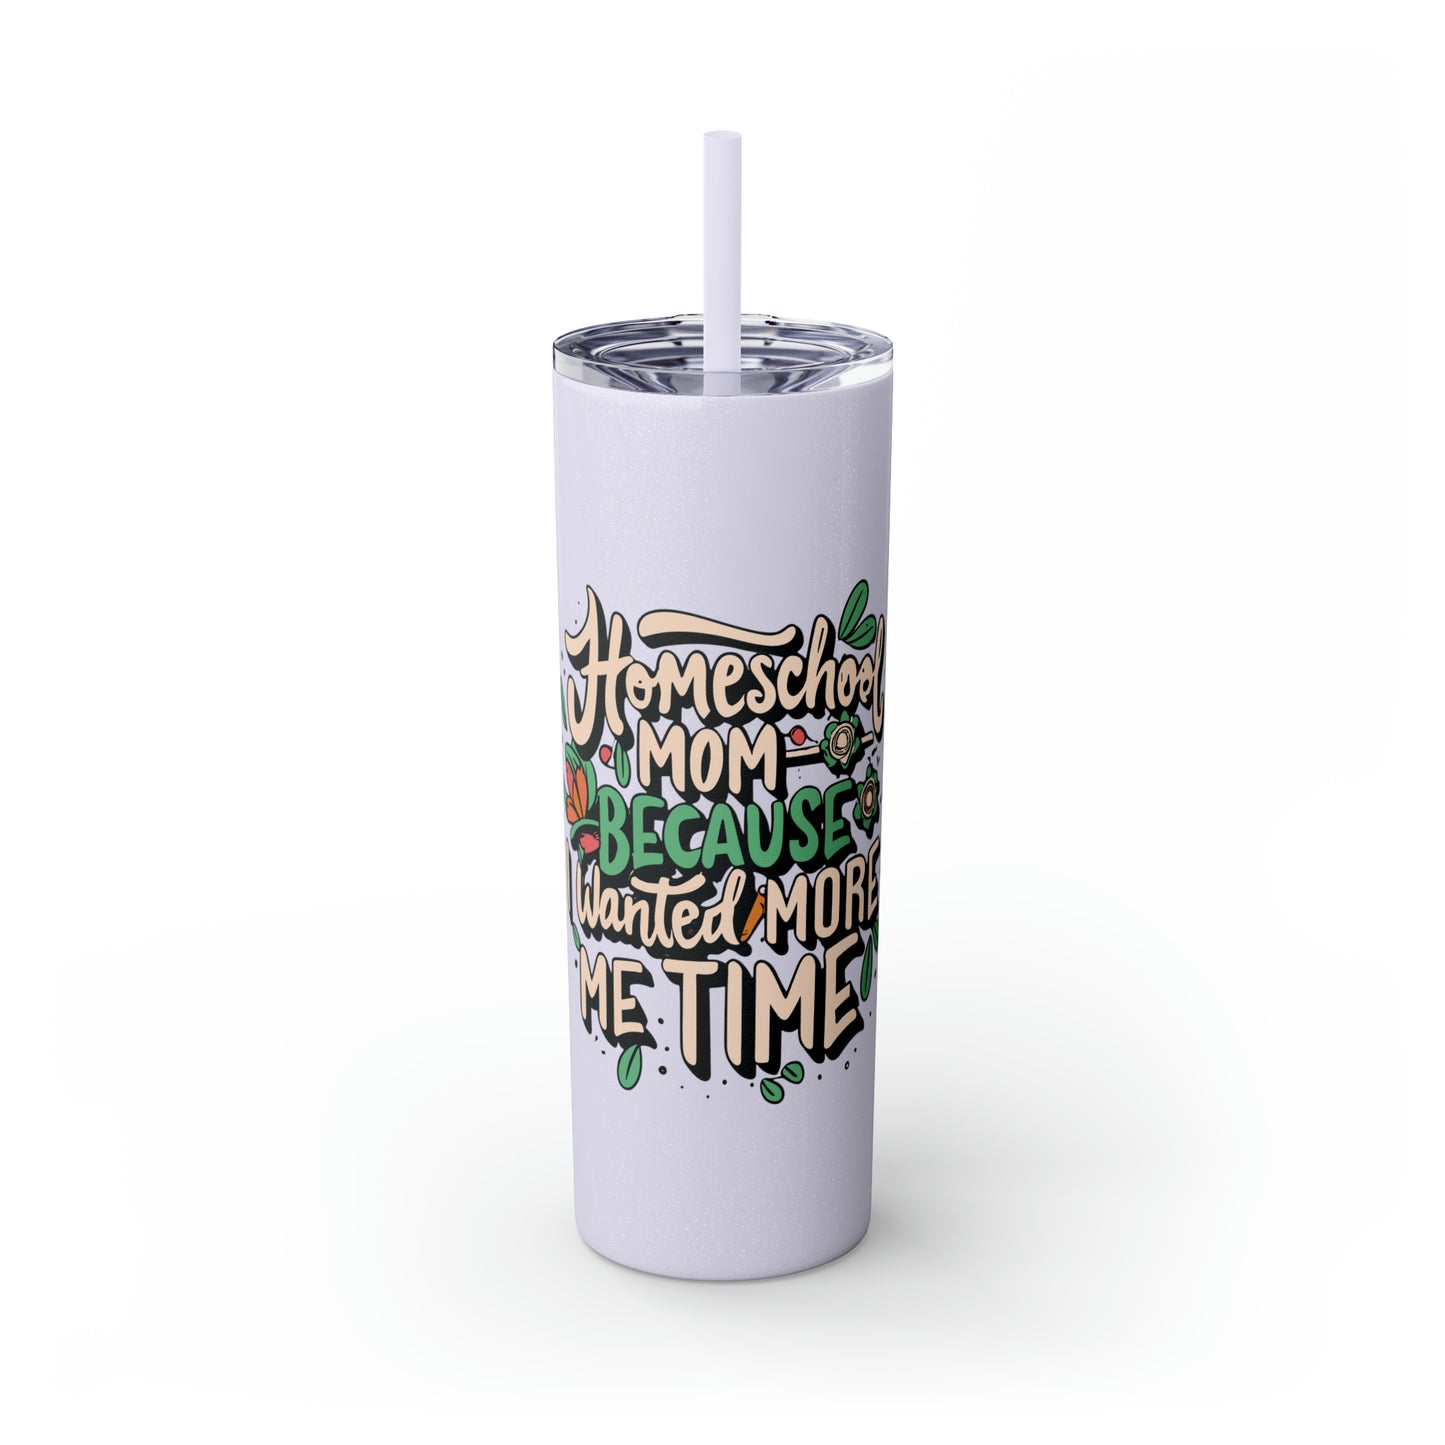 Homeschool Mom Skinny Tumbler with Straw - "Homeschool Mom Because I Wanted More Me Time"